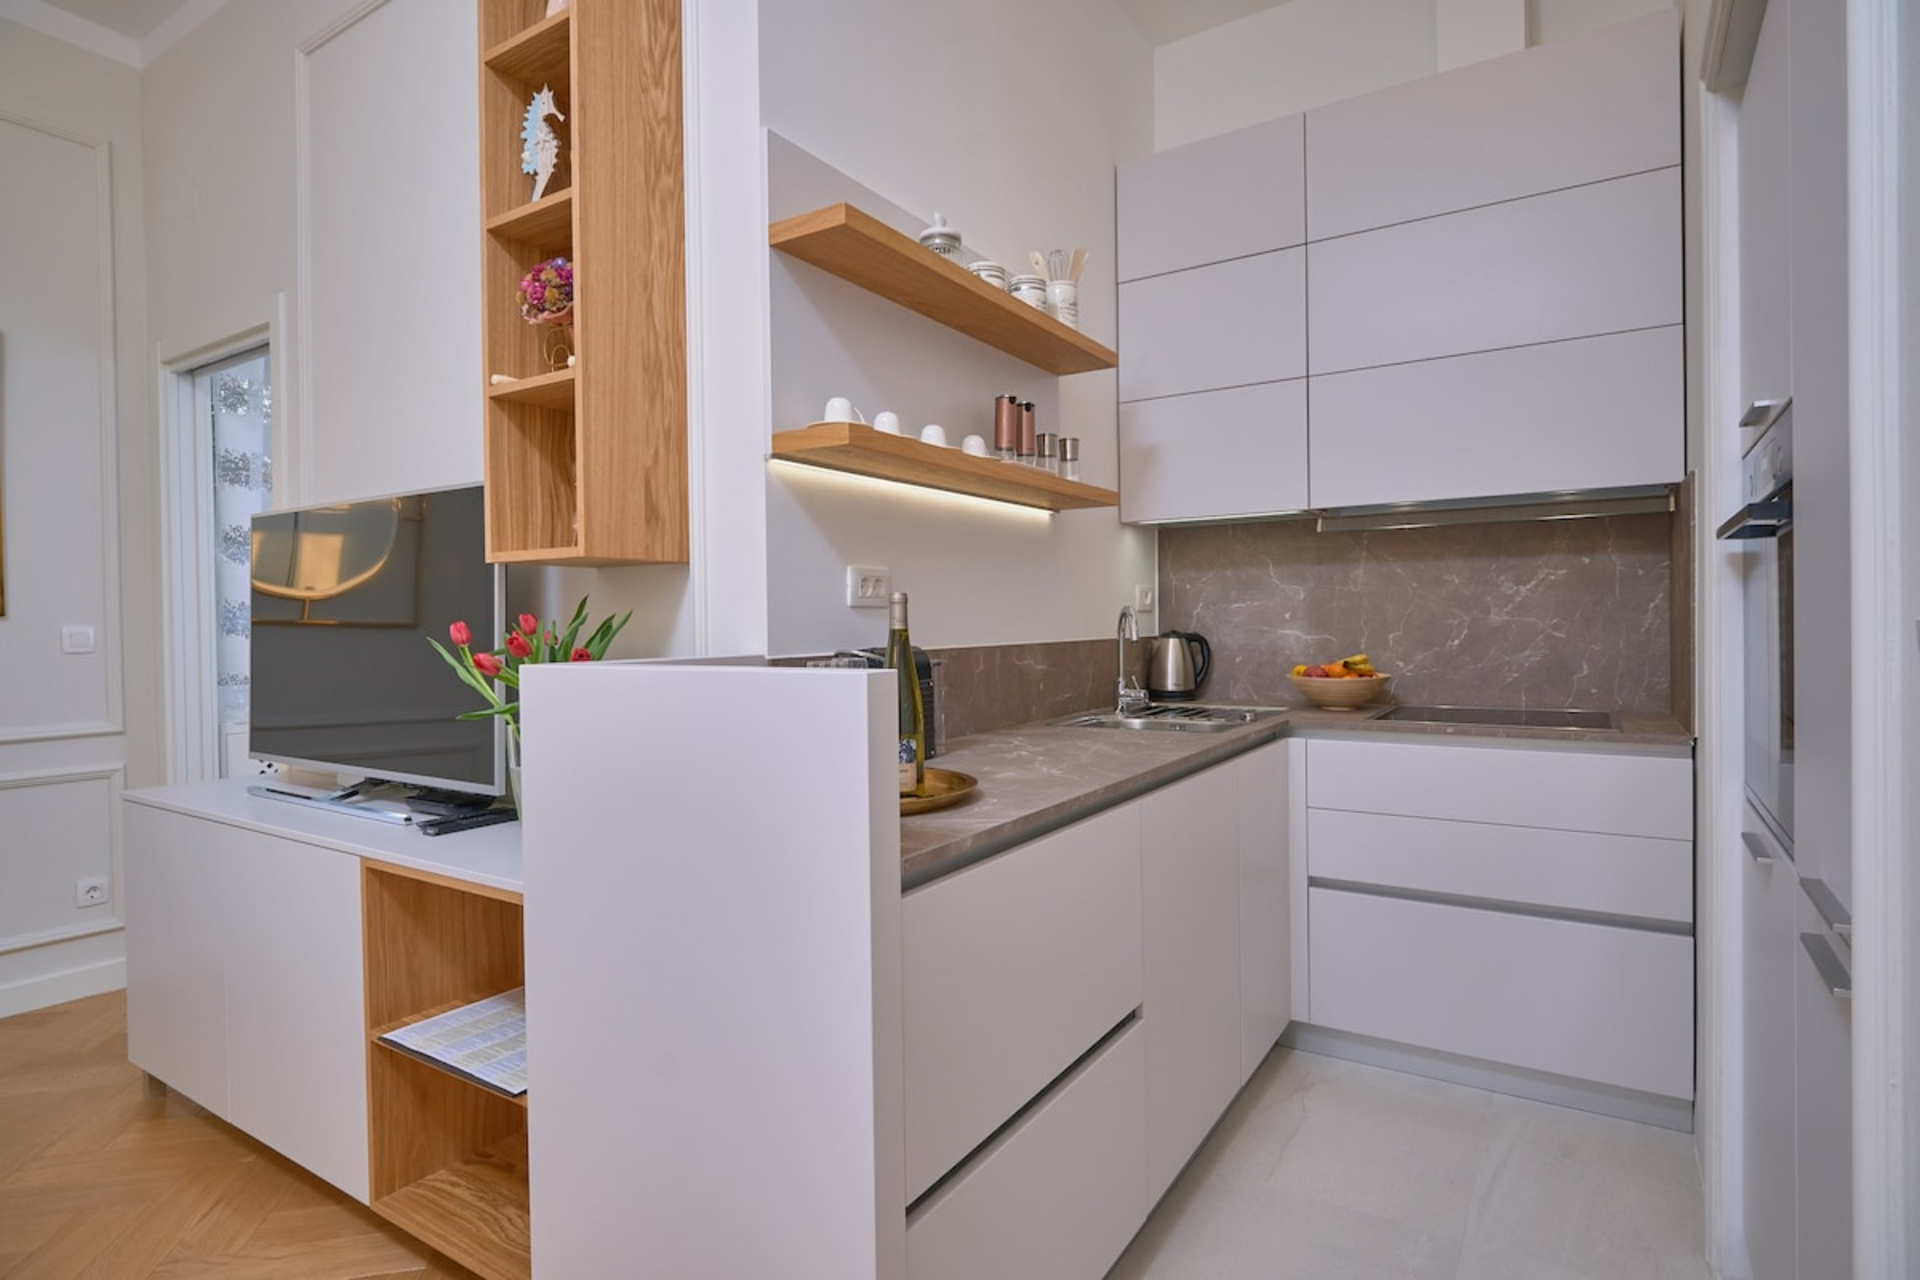 The kitchen is fully equipped with a freezer, refrigerator, oven and a dish washer